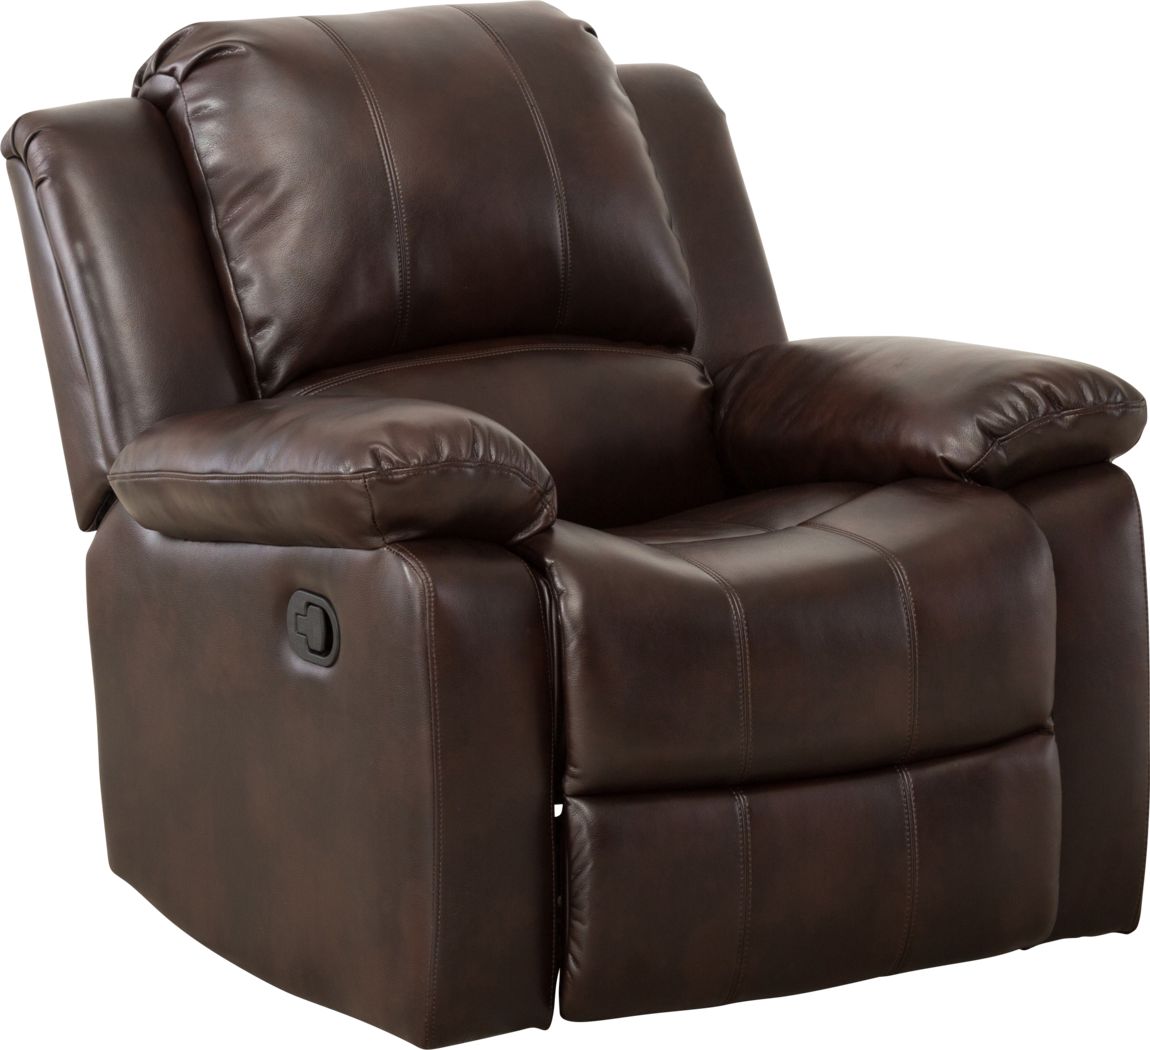 Leather Fabric Brown Reclining Chairs, Black Brown Leather Recliner Chair